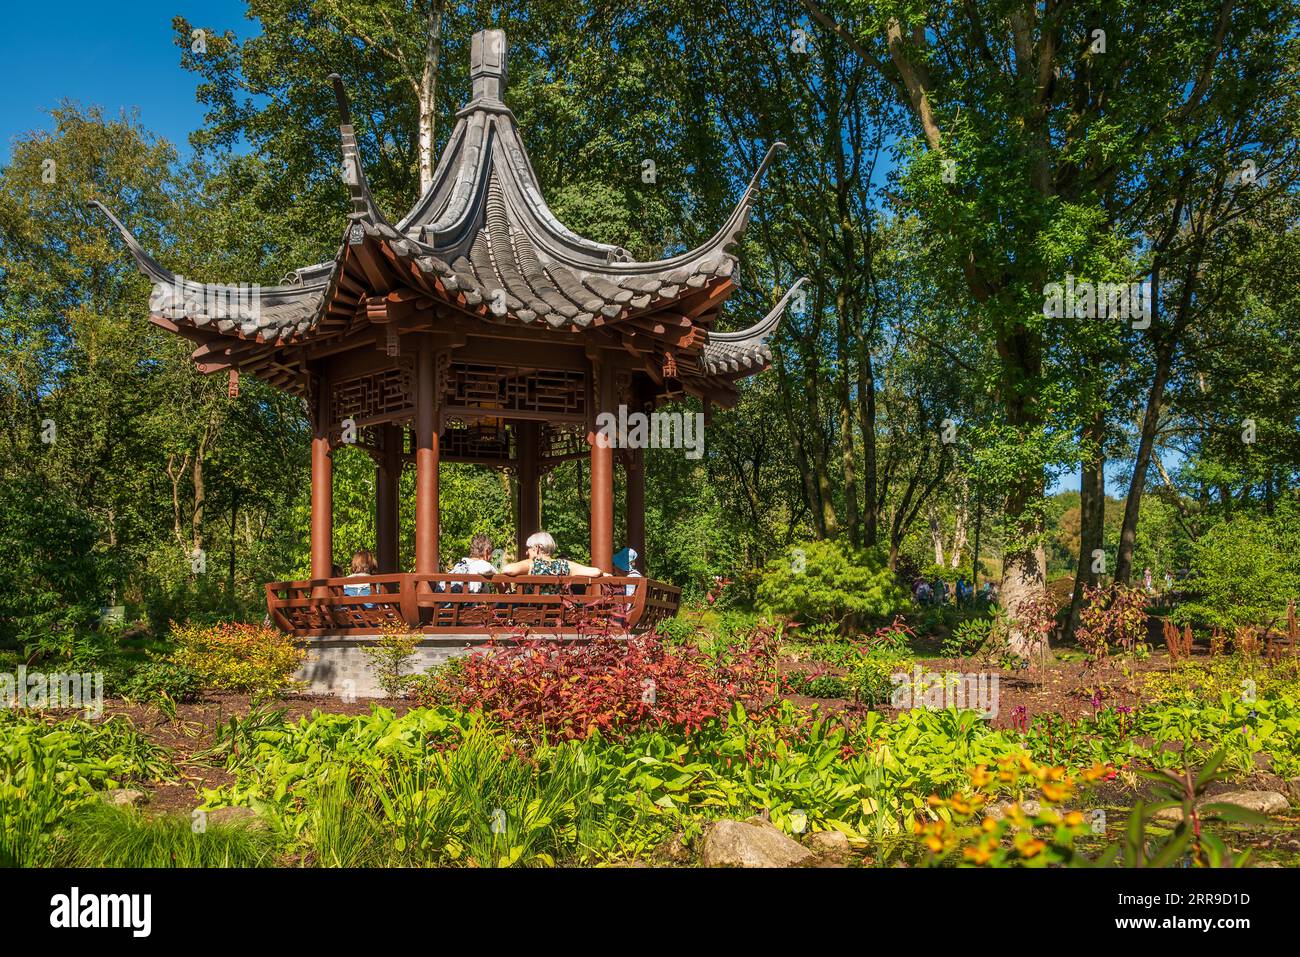 The Qing Yin music pavillion in Chinese Streamside Garden at RHS Bridgewater gardens in Worsley near Manchester. Stock Photo